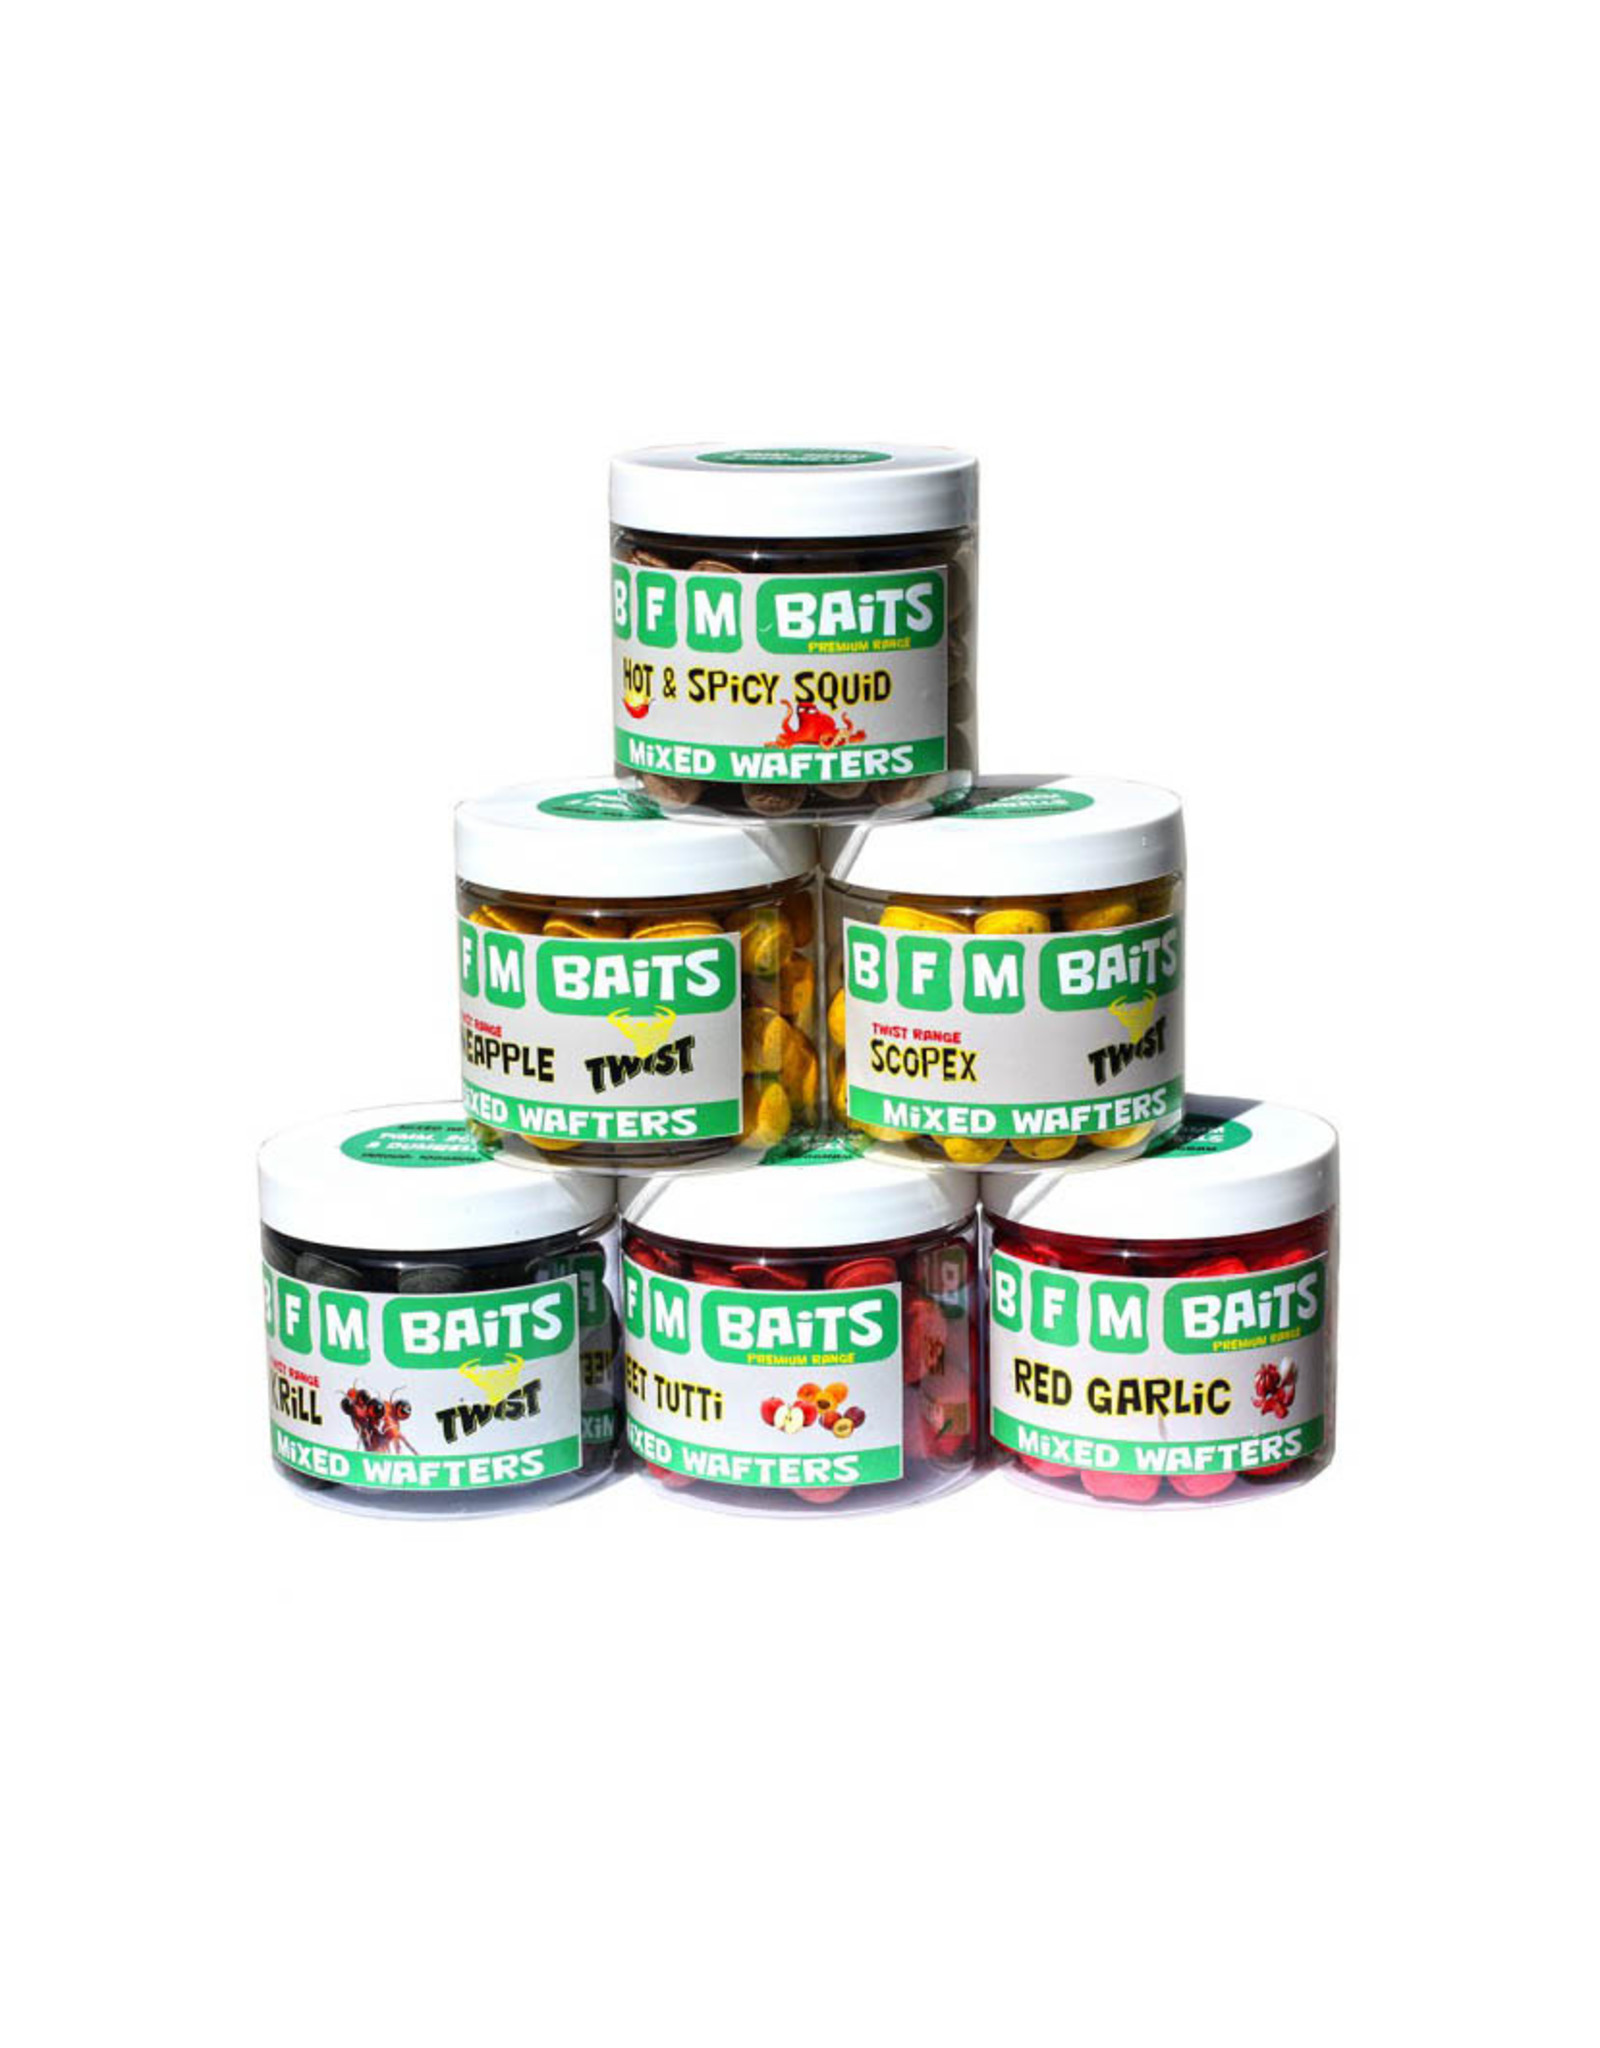 BFM Baits Pineapple Twist – Mixed Wafters